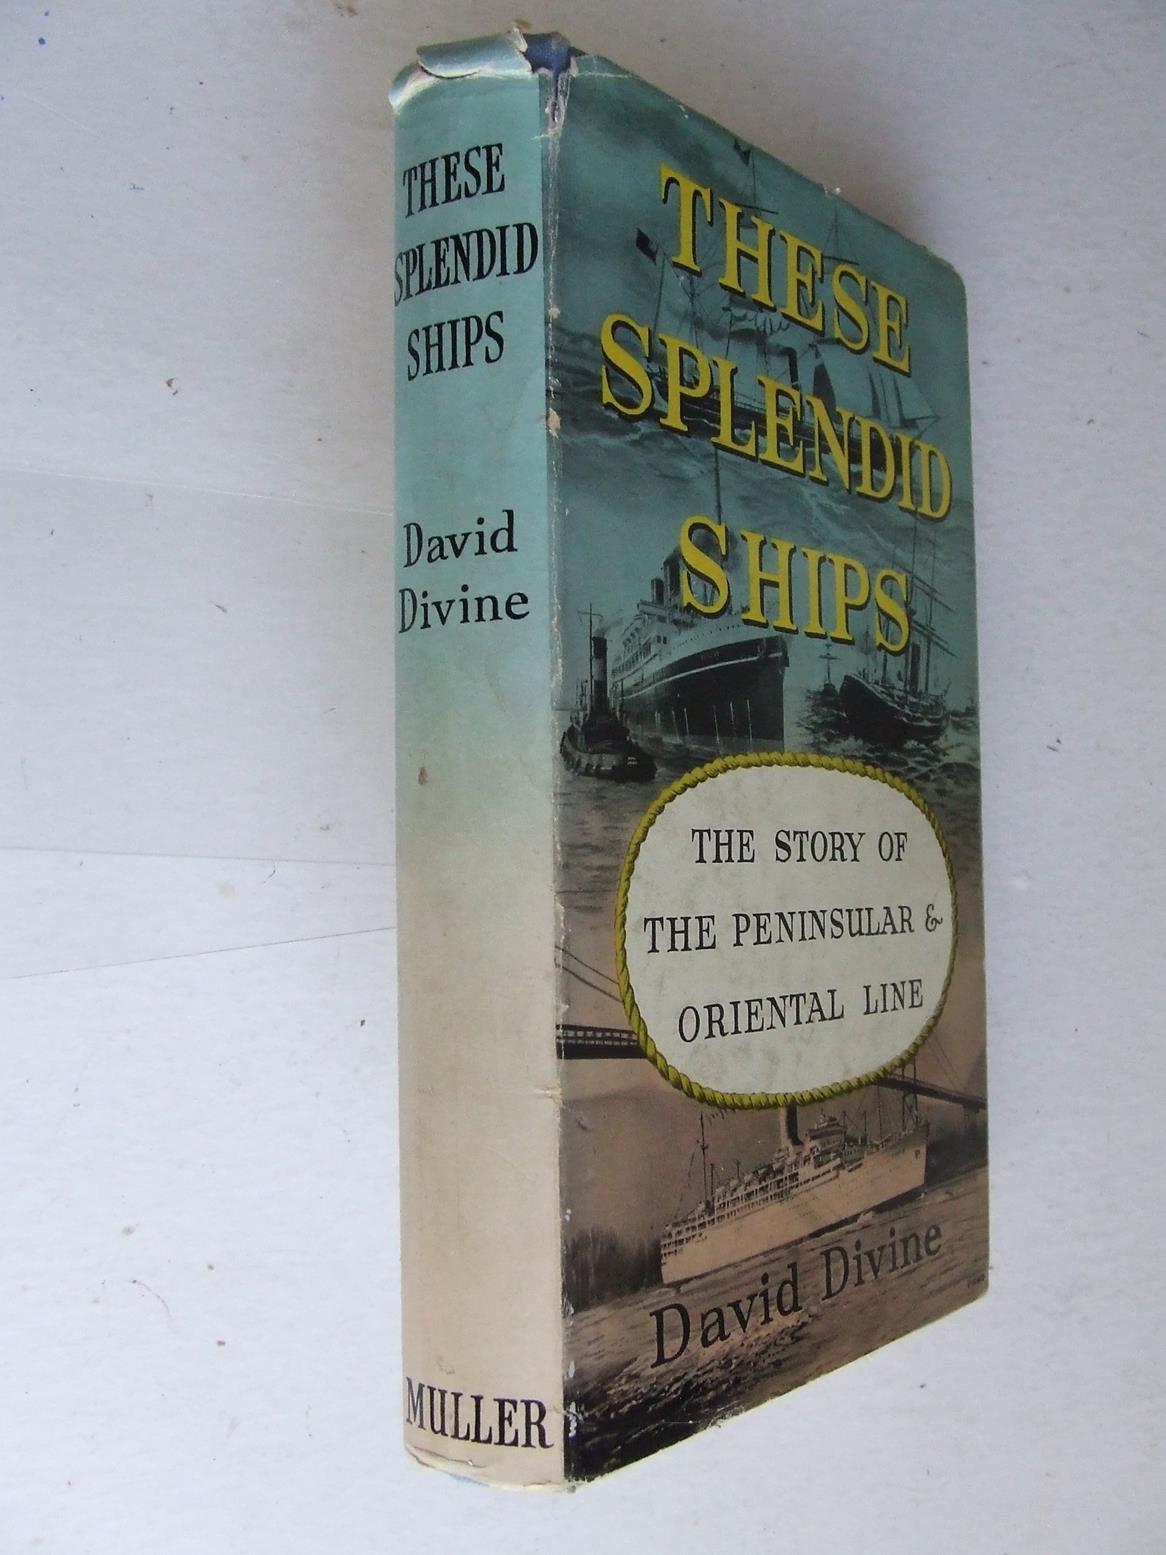 These Splendid Ships, the story of the Peninsular and Oriental Line